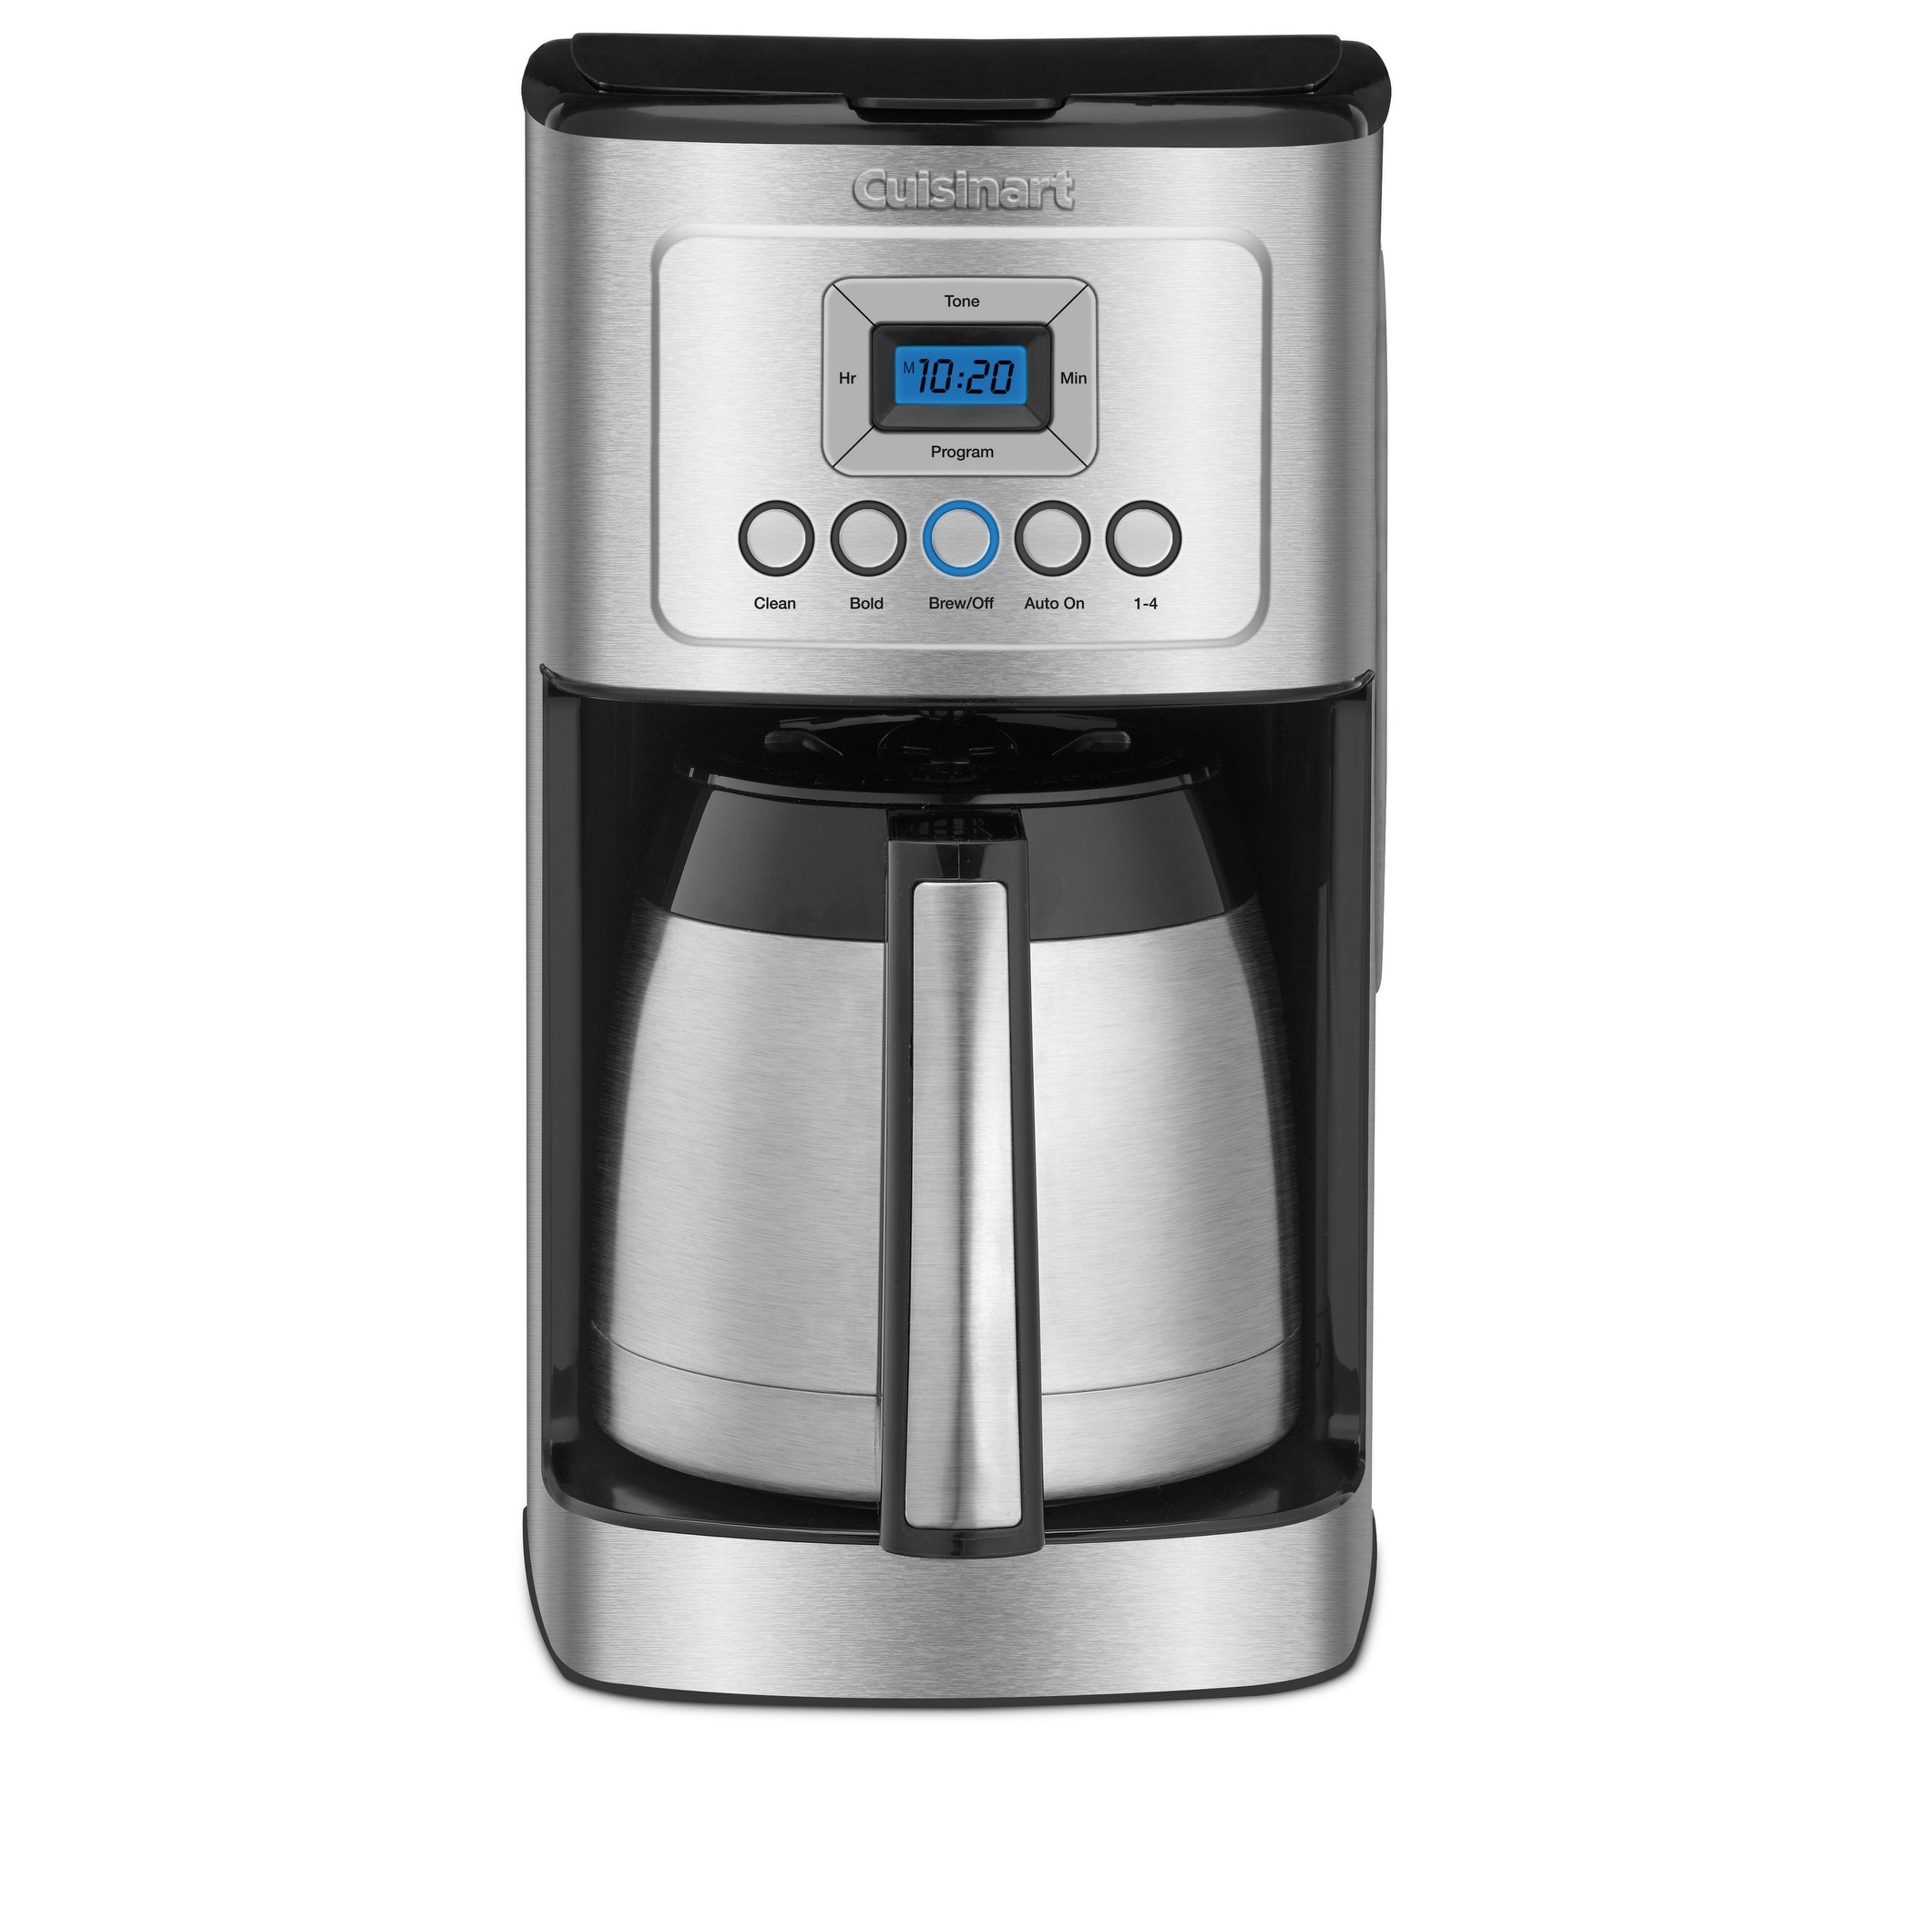 Haden 12-Cup Programmable Coffee Maker with Strength Control and Timer -  Bed Bath & Beyond - 32051594